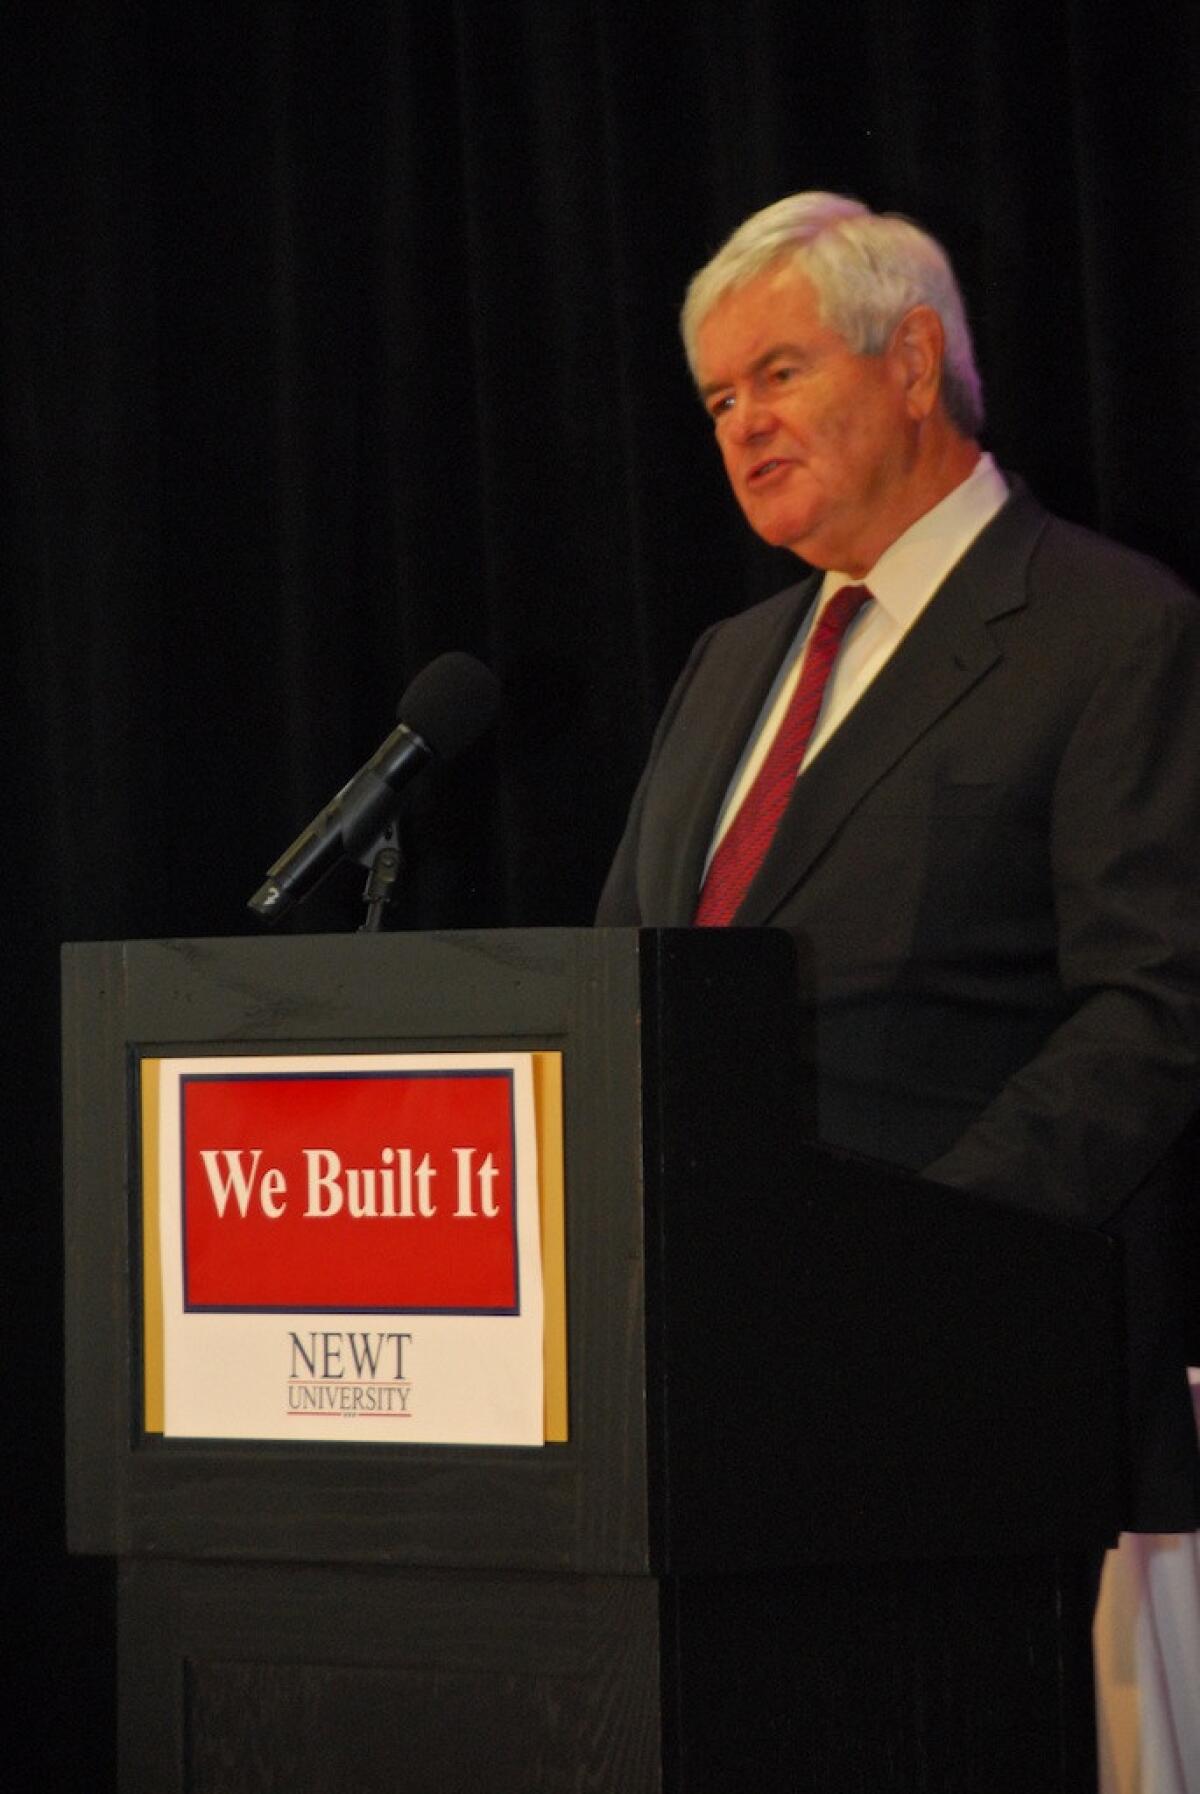 Newt Gingrich kicks off second day of "Newt U" with a jab at President Obama.